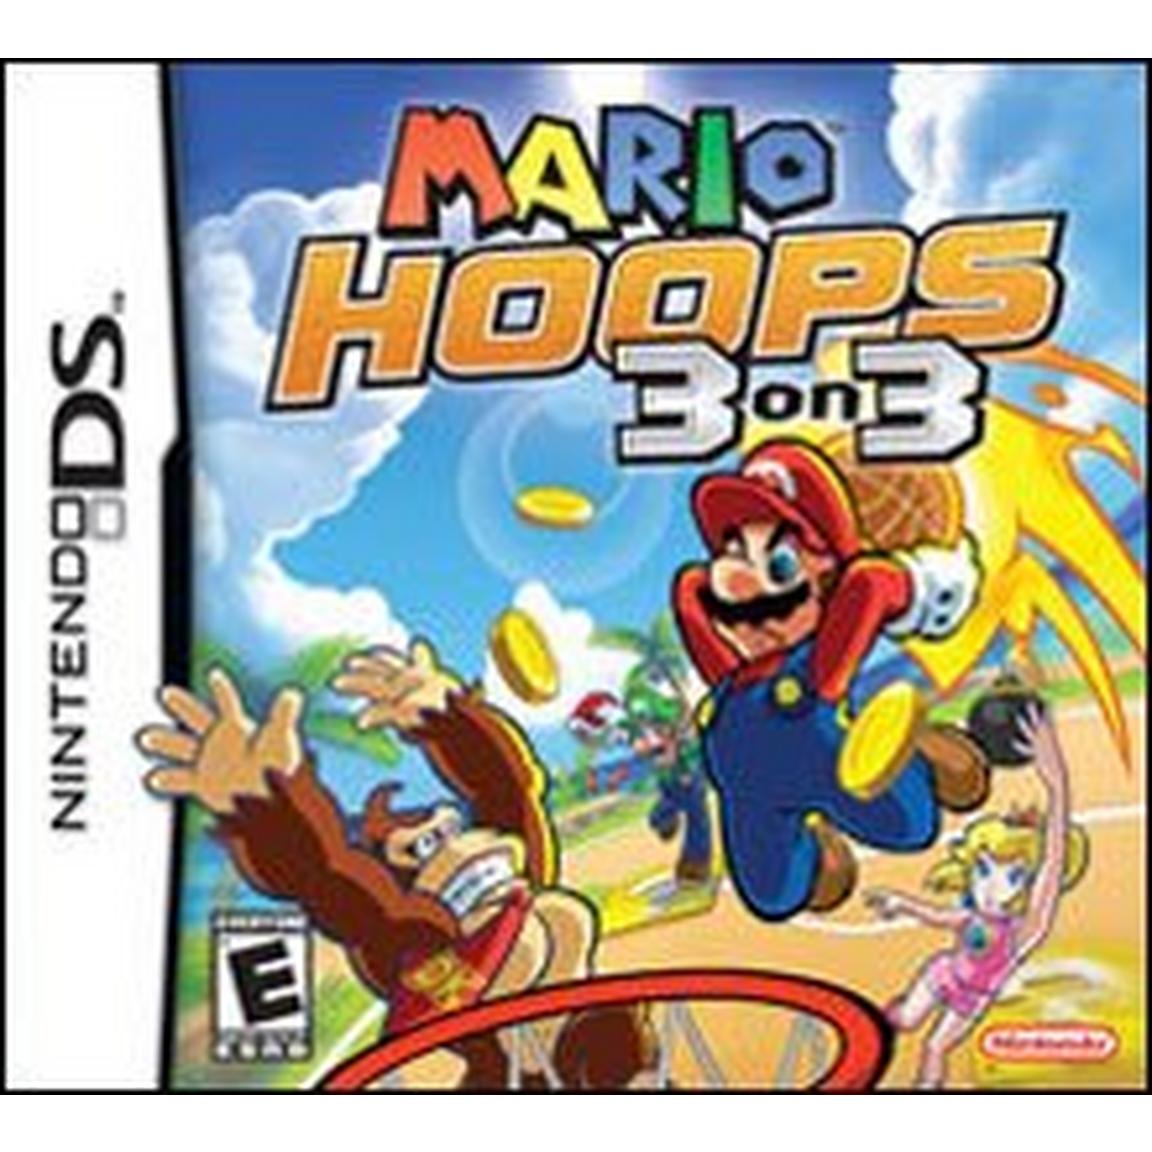 Mario Hoops 3-On-3 - Nintendo DS, Pre-Owned